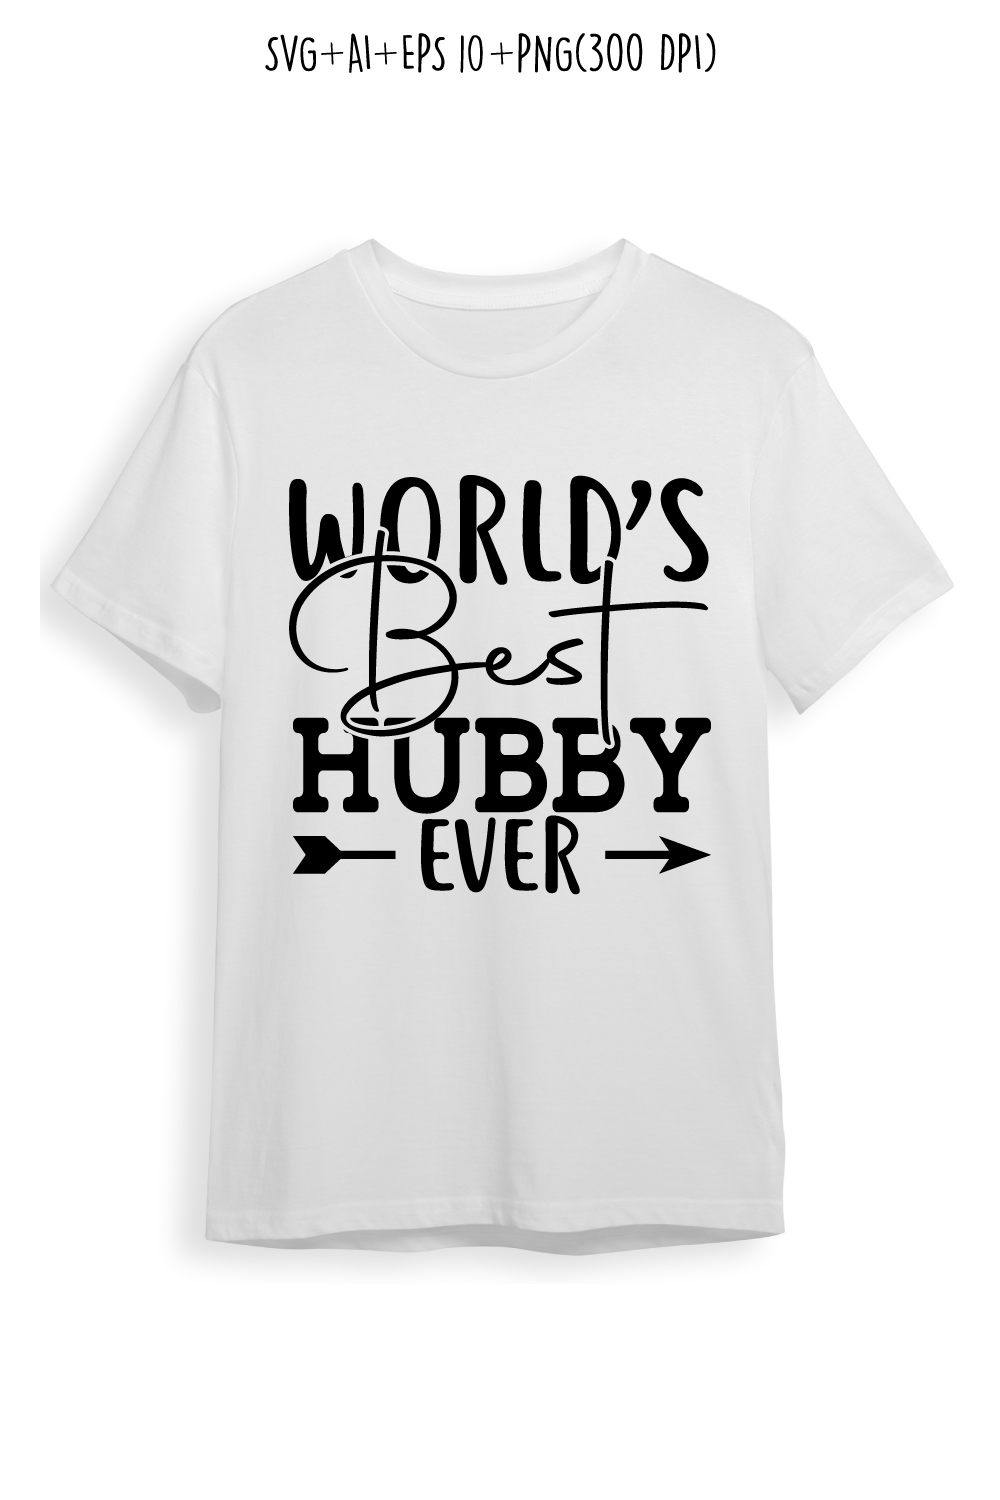 world's best hubby ever SVG design for t-shirts, cards, frame artwork, phone cases, bags, mugs, stickers, tumblers, print, etc pinterest preview image.